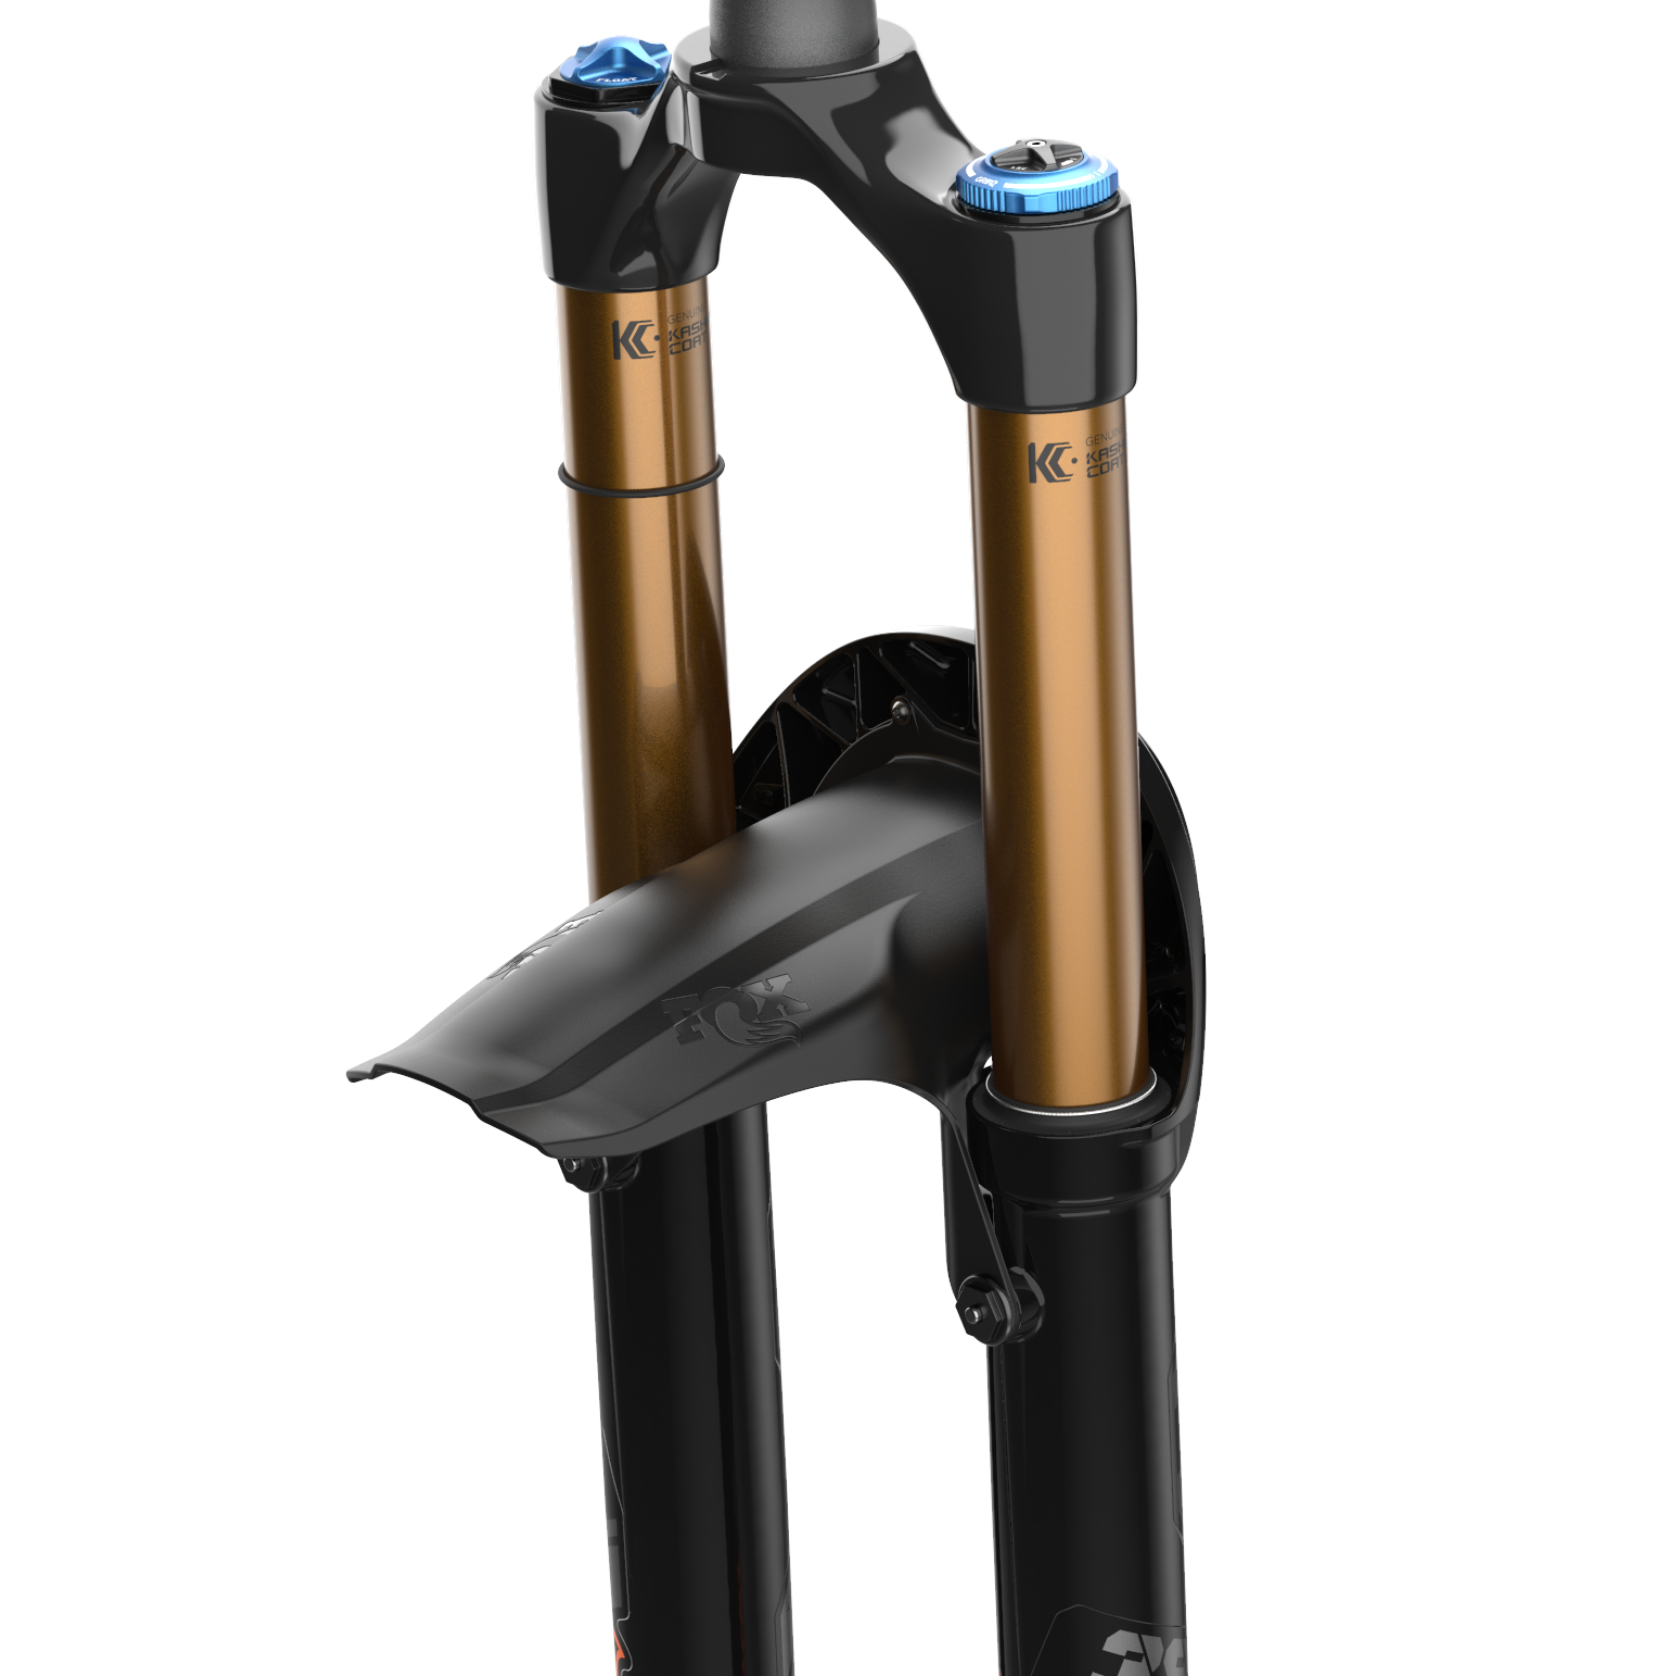 Fox Racing Shox Suspension Fork 38 Float Performance Elite 27.5 Inches,  15x110 mm, GRIP2, 44 mm Offset, Tapered